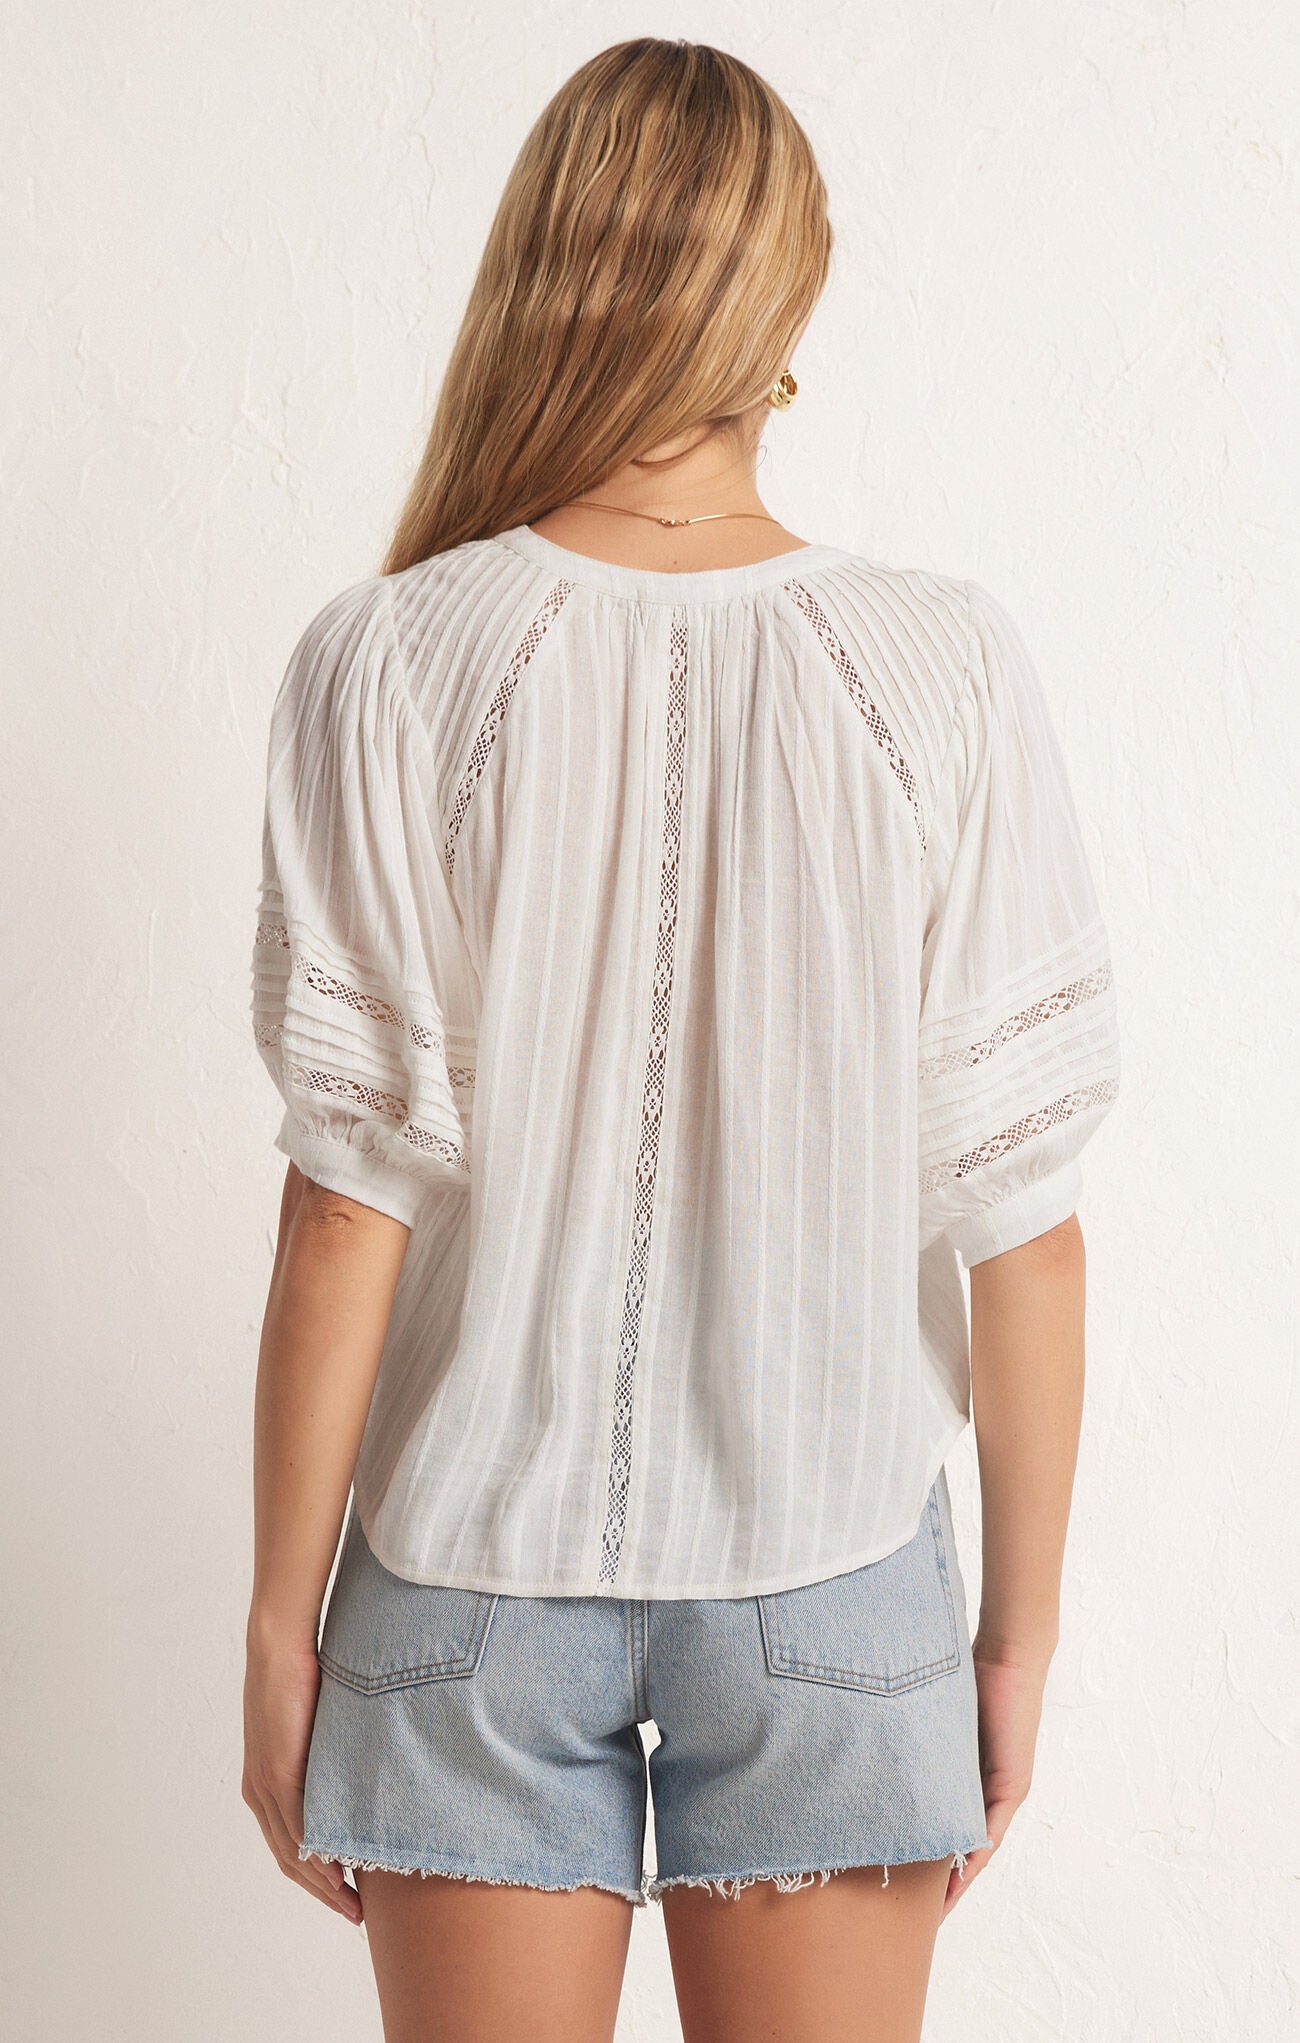 ZSupply 'Elliot Lace Inset Top'